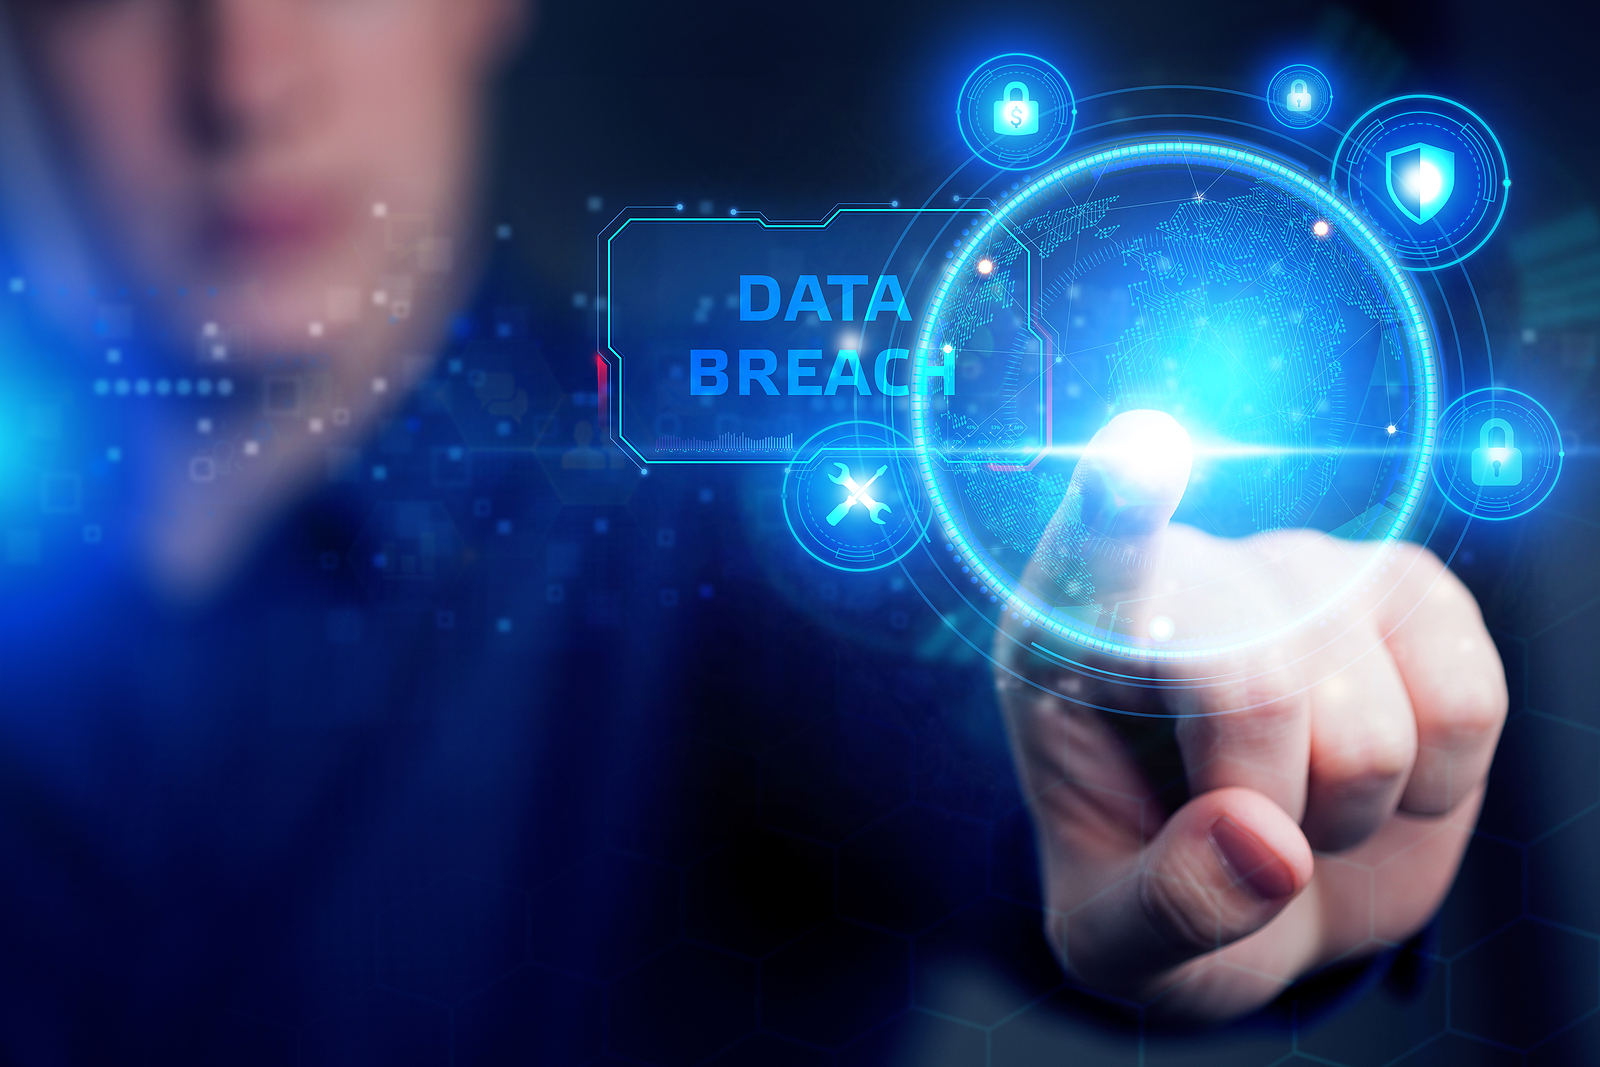 Data Breaches Decline 19% in 2020, But More Work Must Be Done